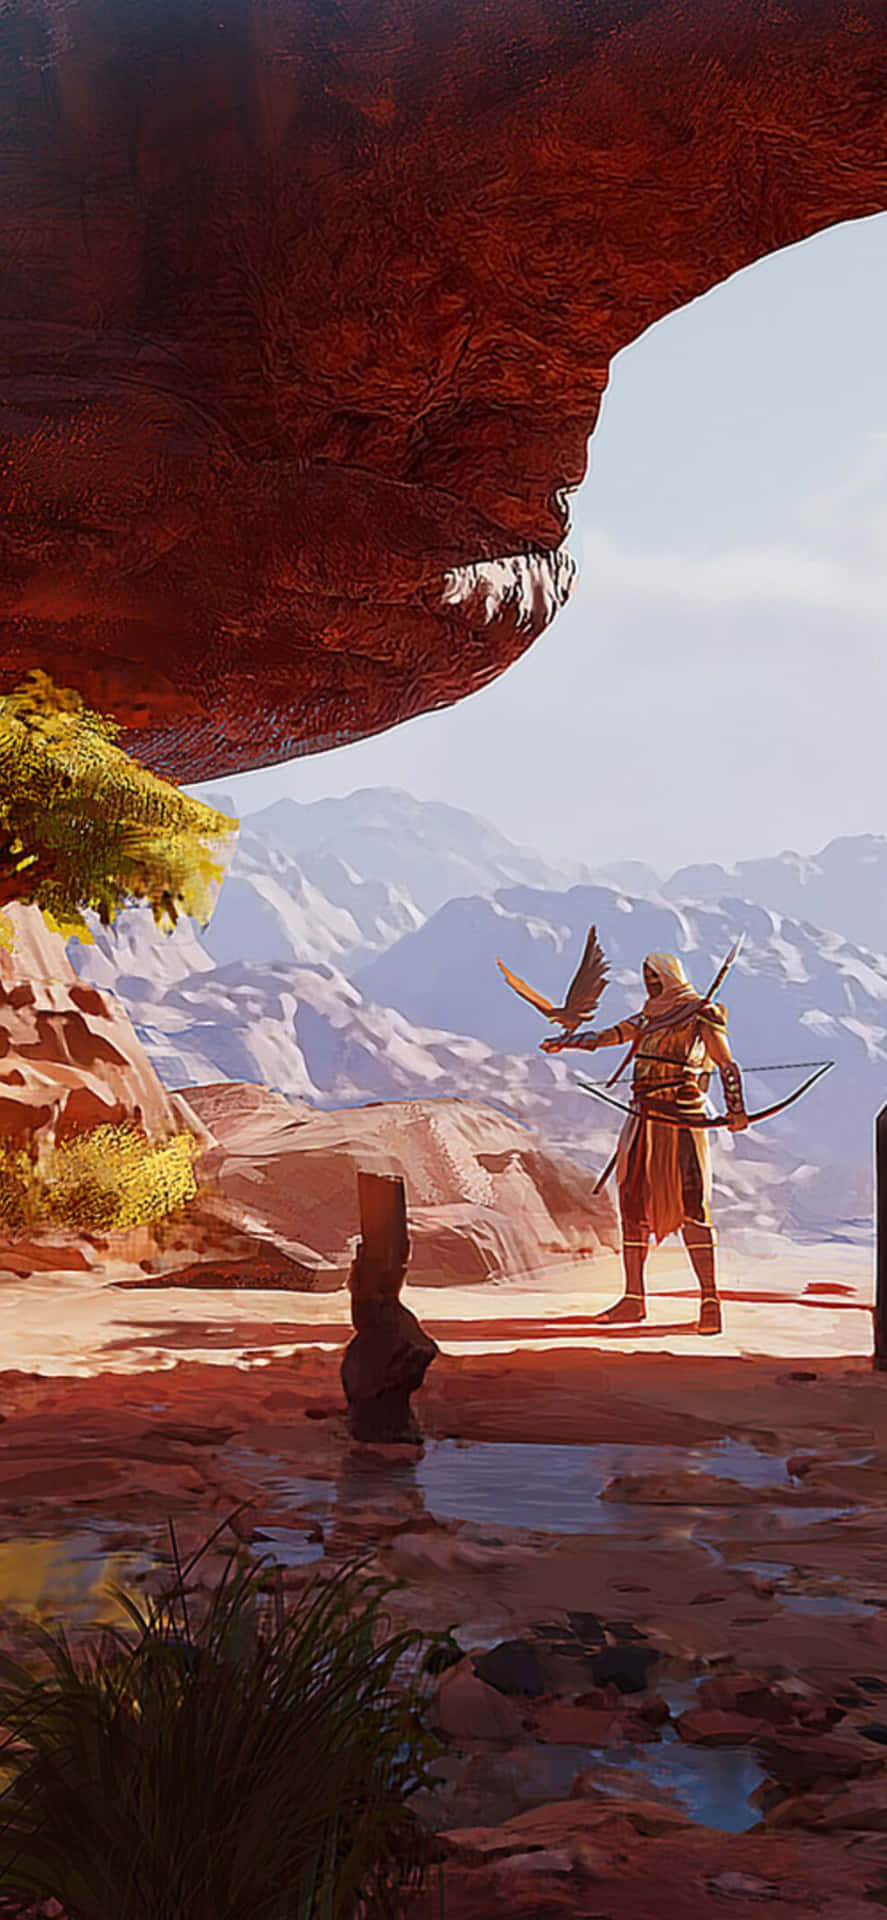 Experience the Assassin's Creed Origins adventure on your Iphone X